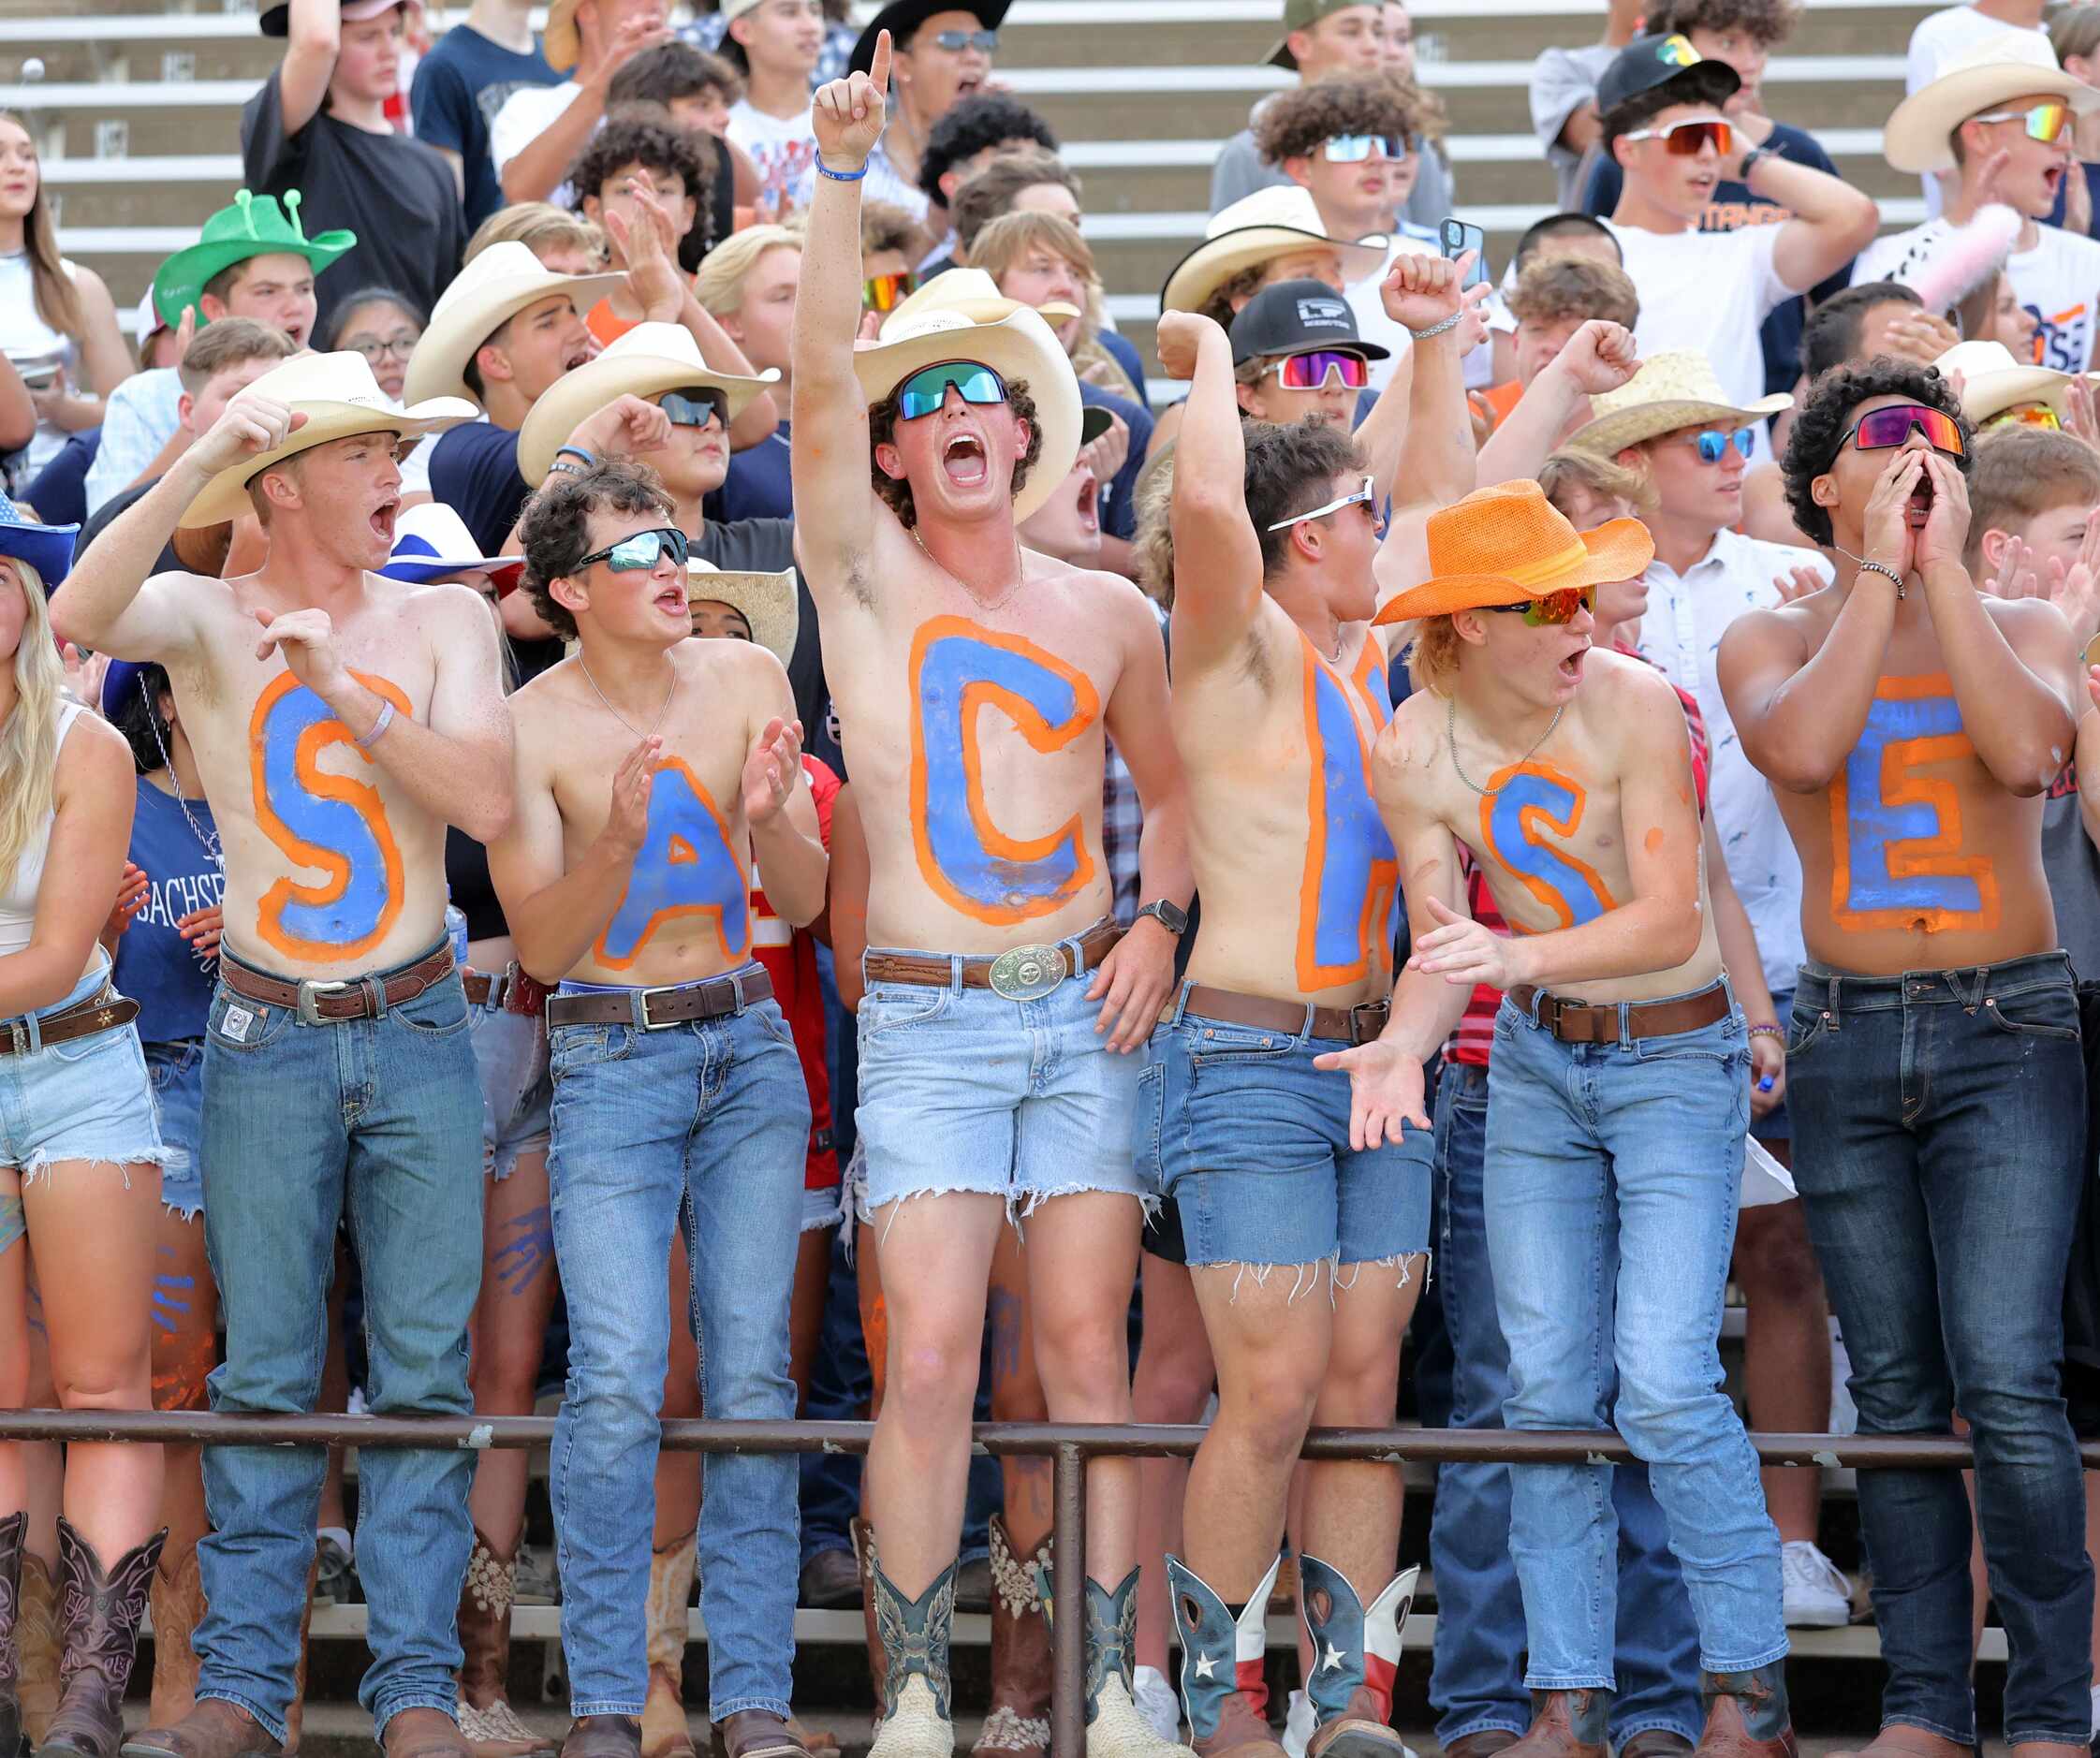 Sachse student boosters, with SACHSE painted on their chests, cheer during the first half of...